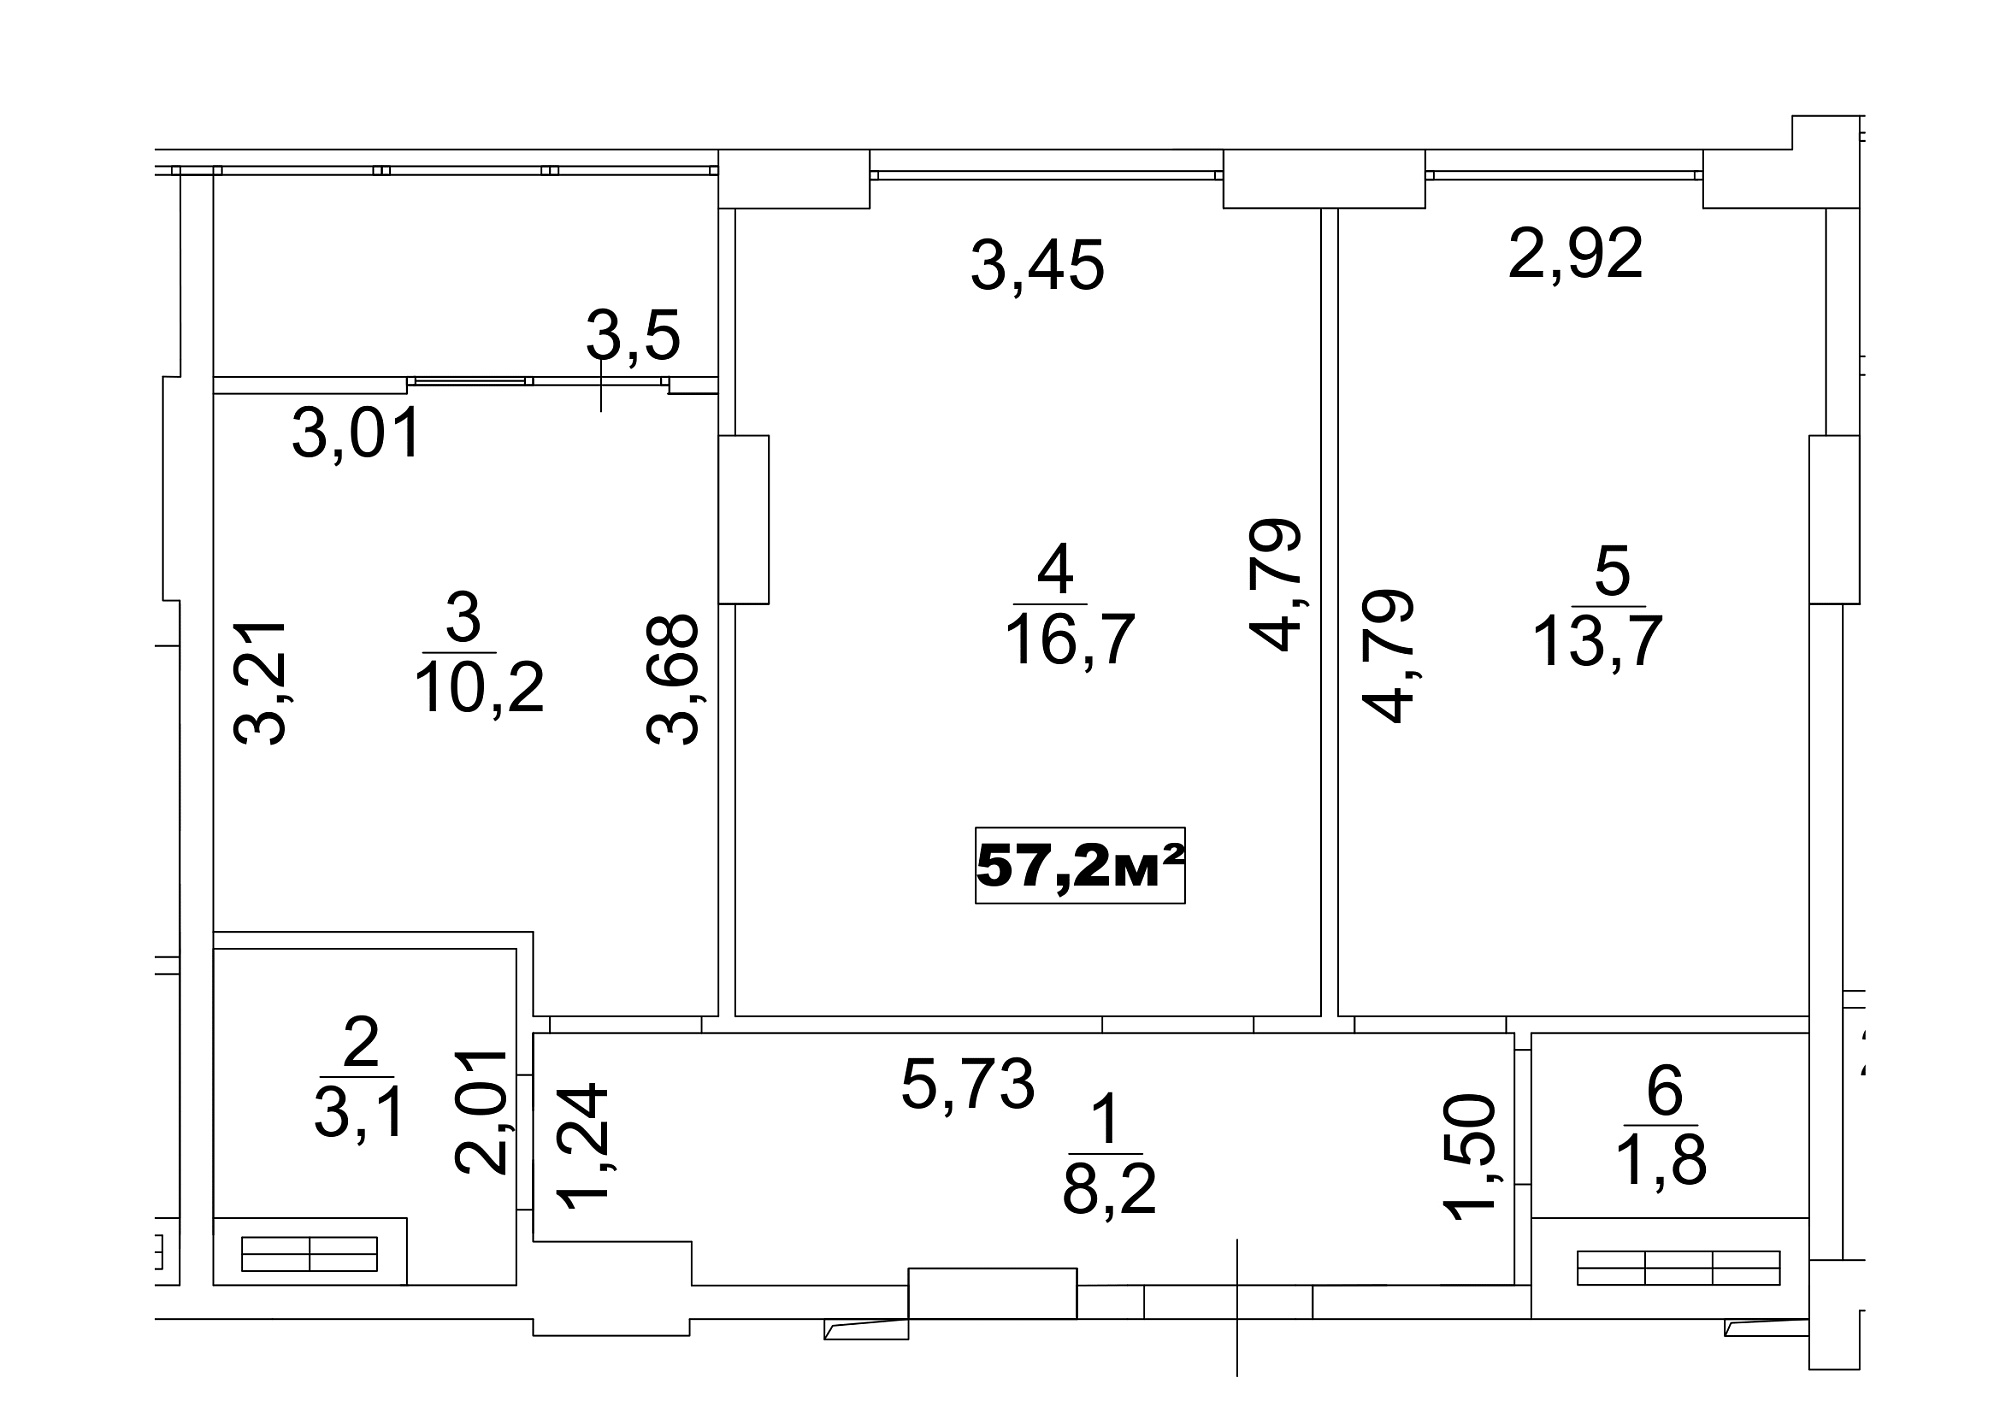 Planning 2-rm flats area 57.2m2, AB-13-08/00064.